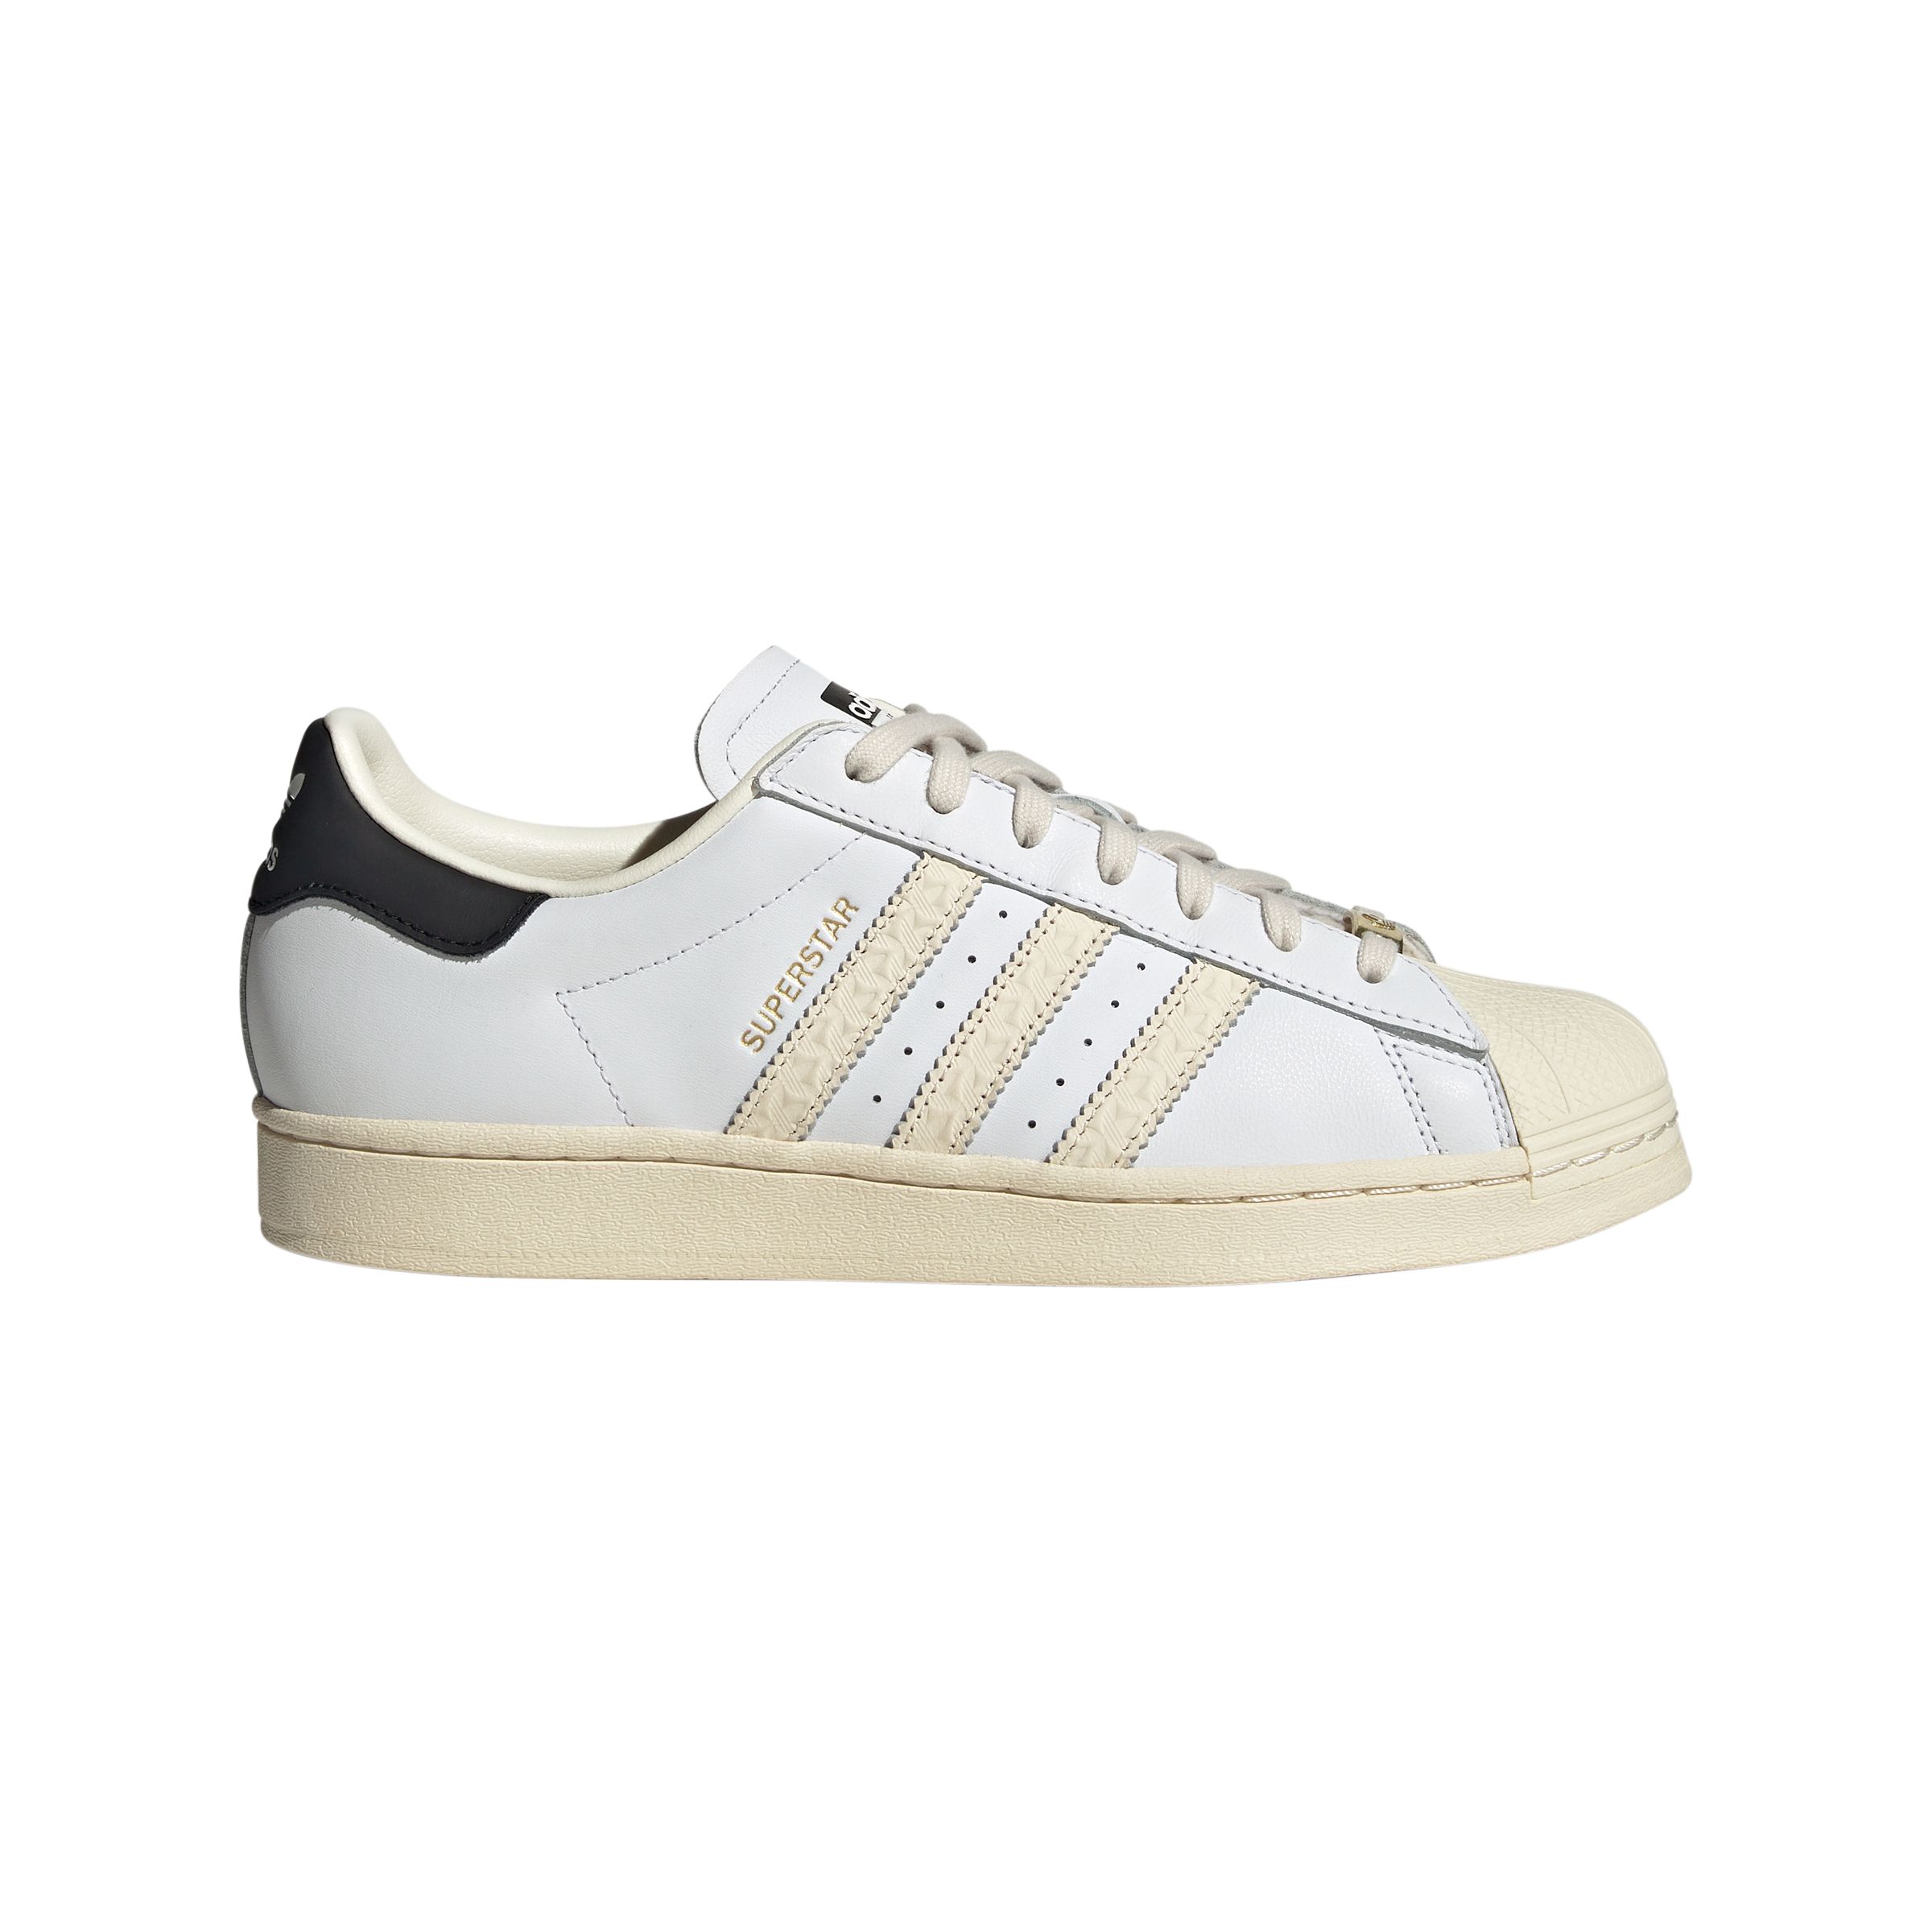 Image of adidas Men's Superstar Shoes